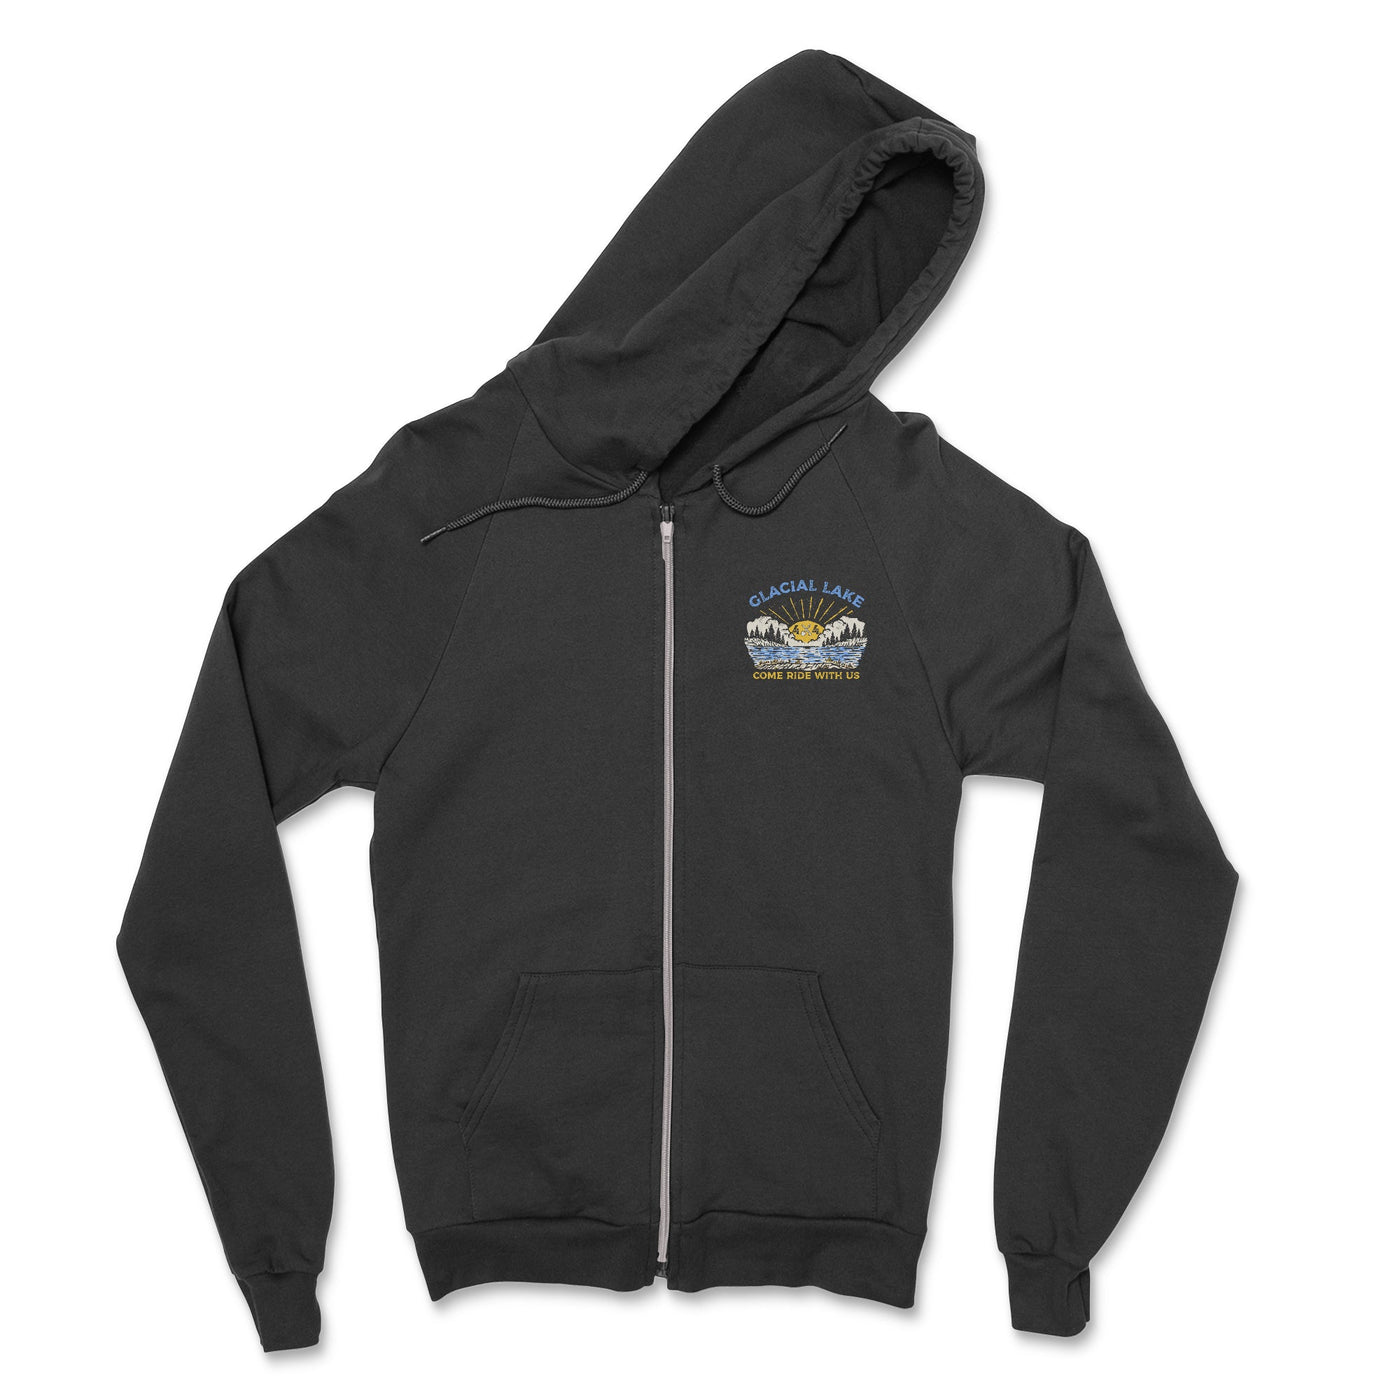 Glacial Lake 4 x 4 Offroad Club Zip-up Hoodie - Goats Trail Off-Road Apparel Company